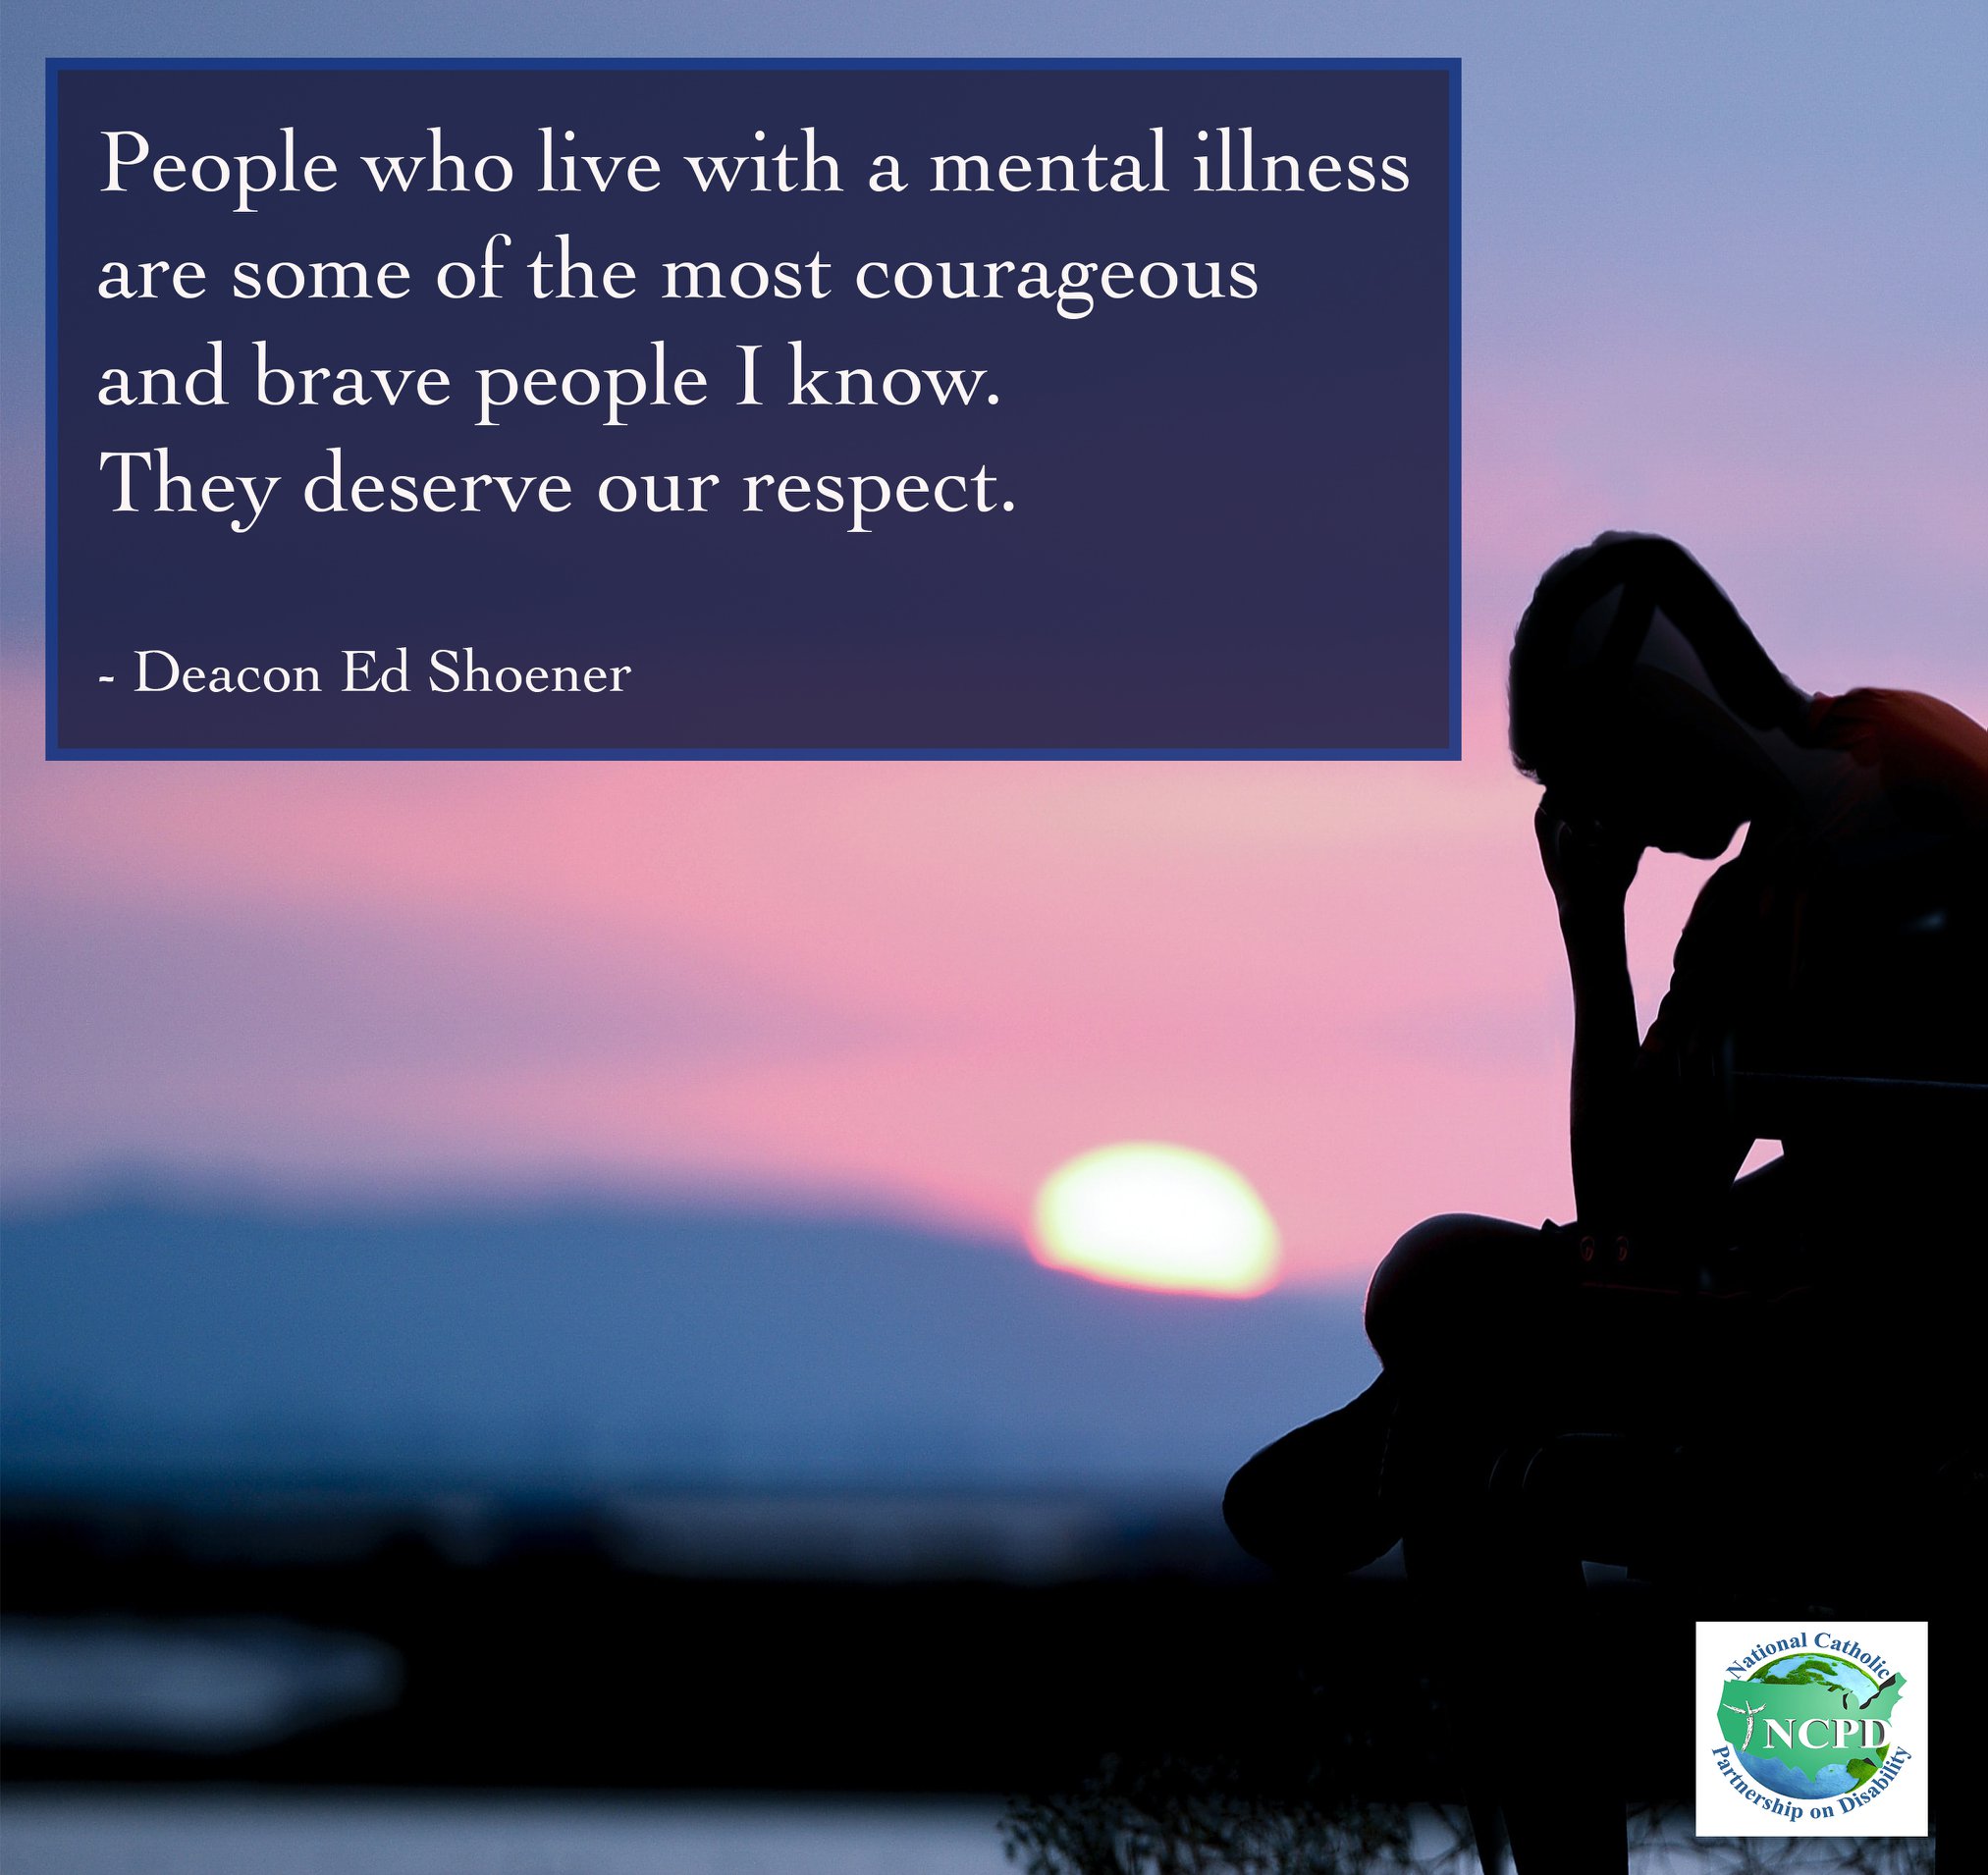 People with mental illness are some of the most courageous and brave people that I know. They deserve our respect. 